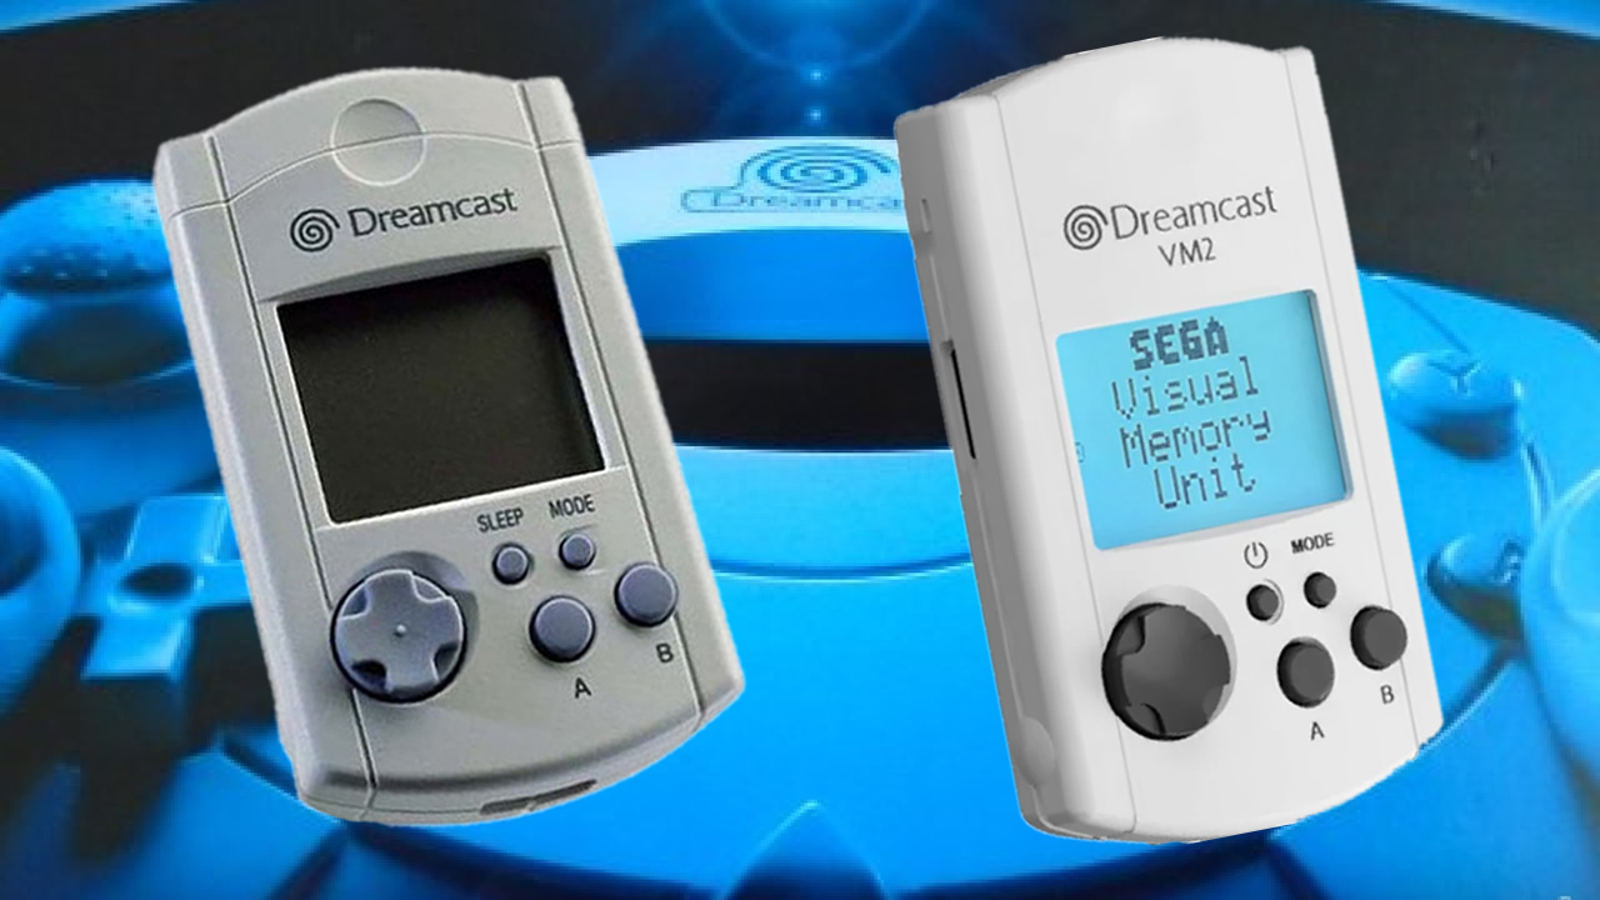 The Dreamcast lives on with a new 'next-gen' iteration of its iconic VMU  memory card